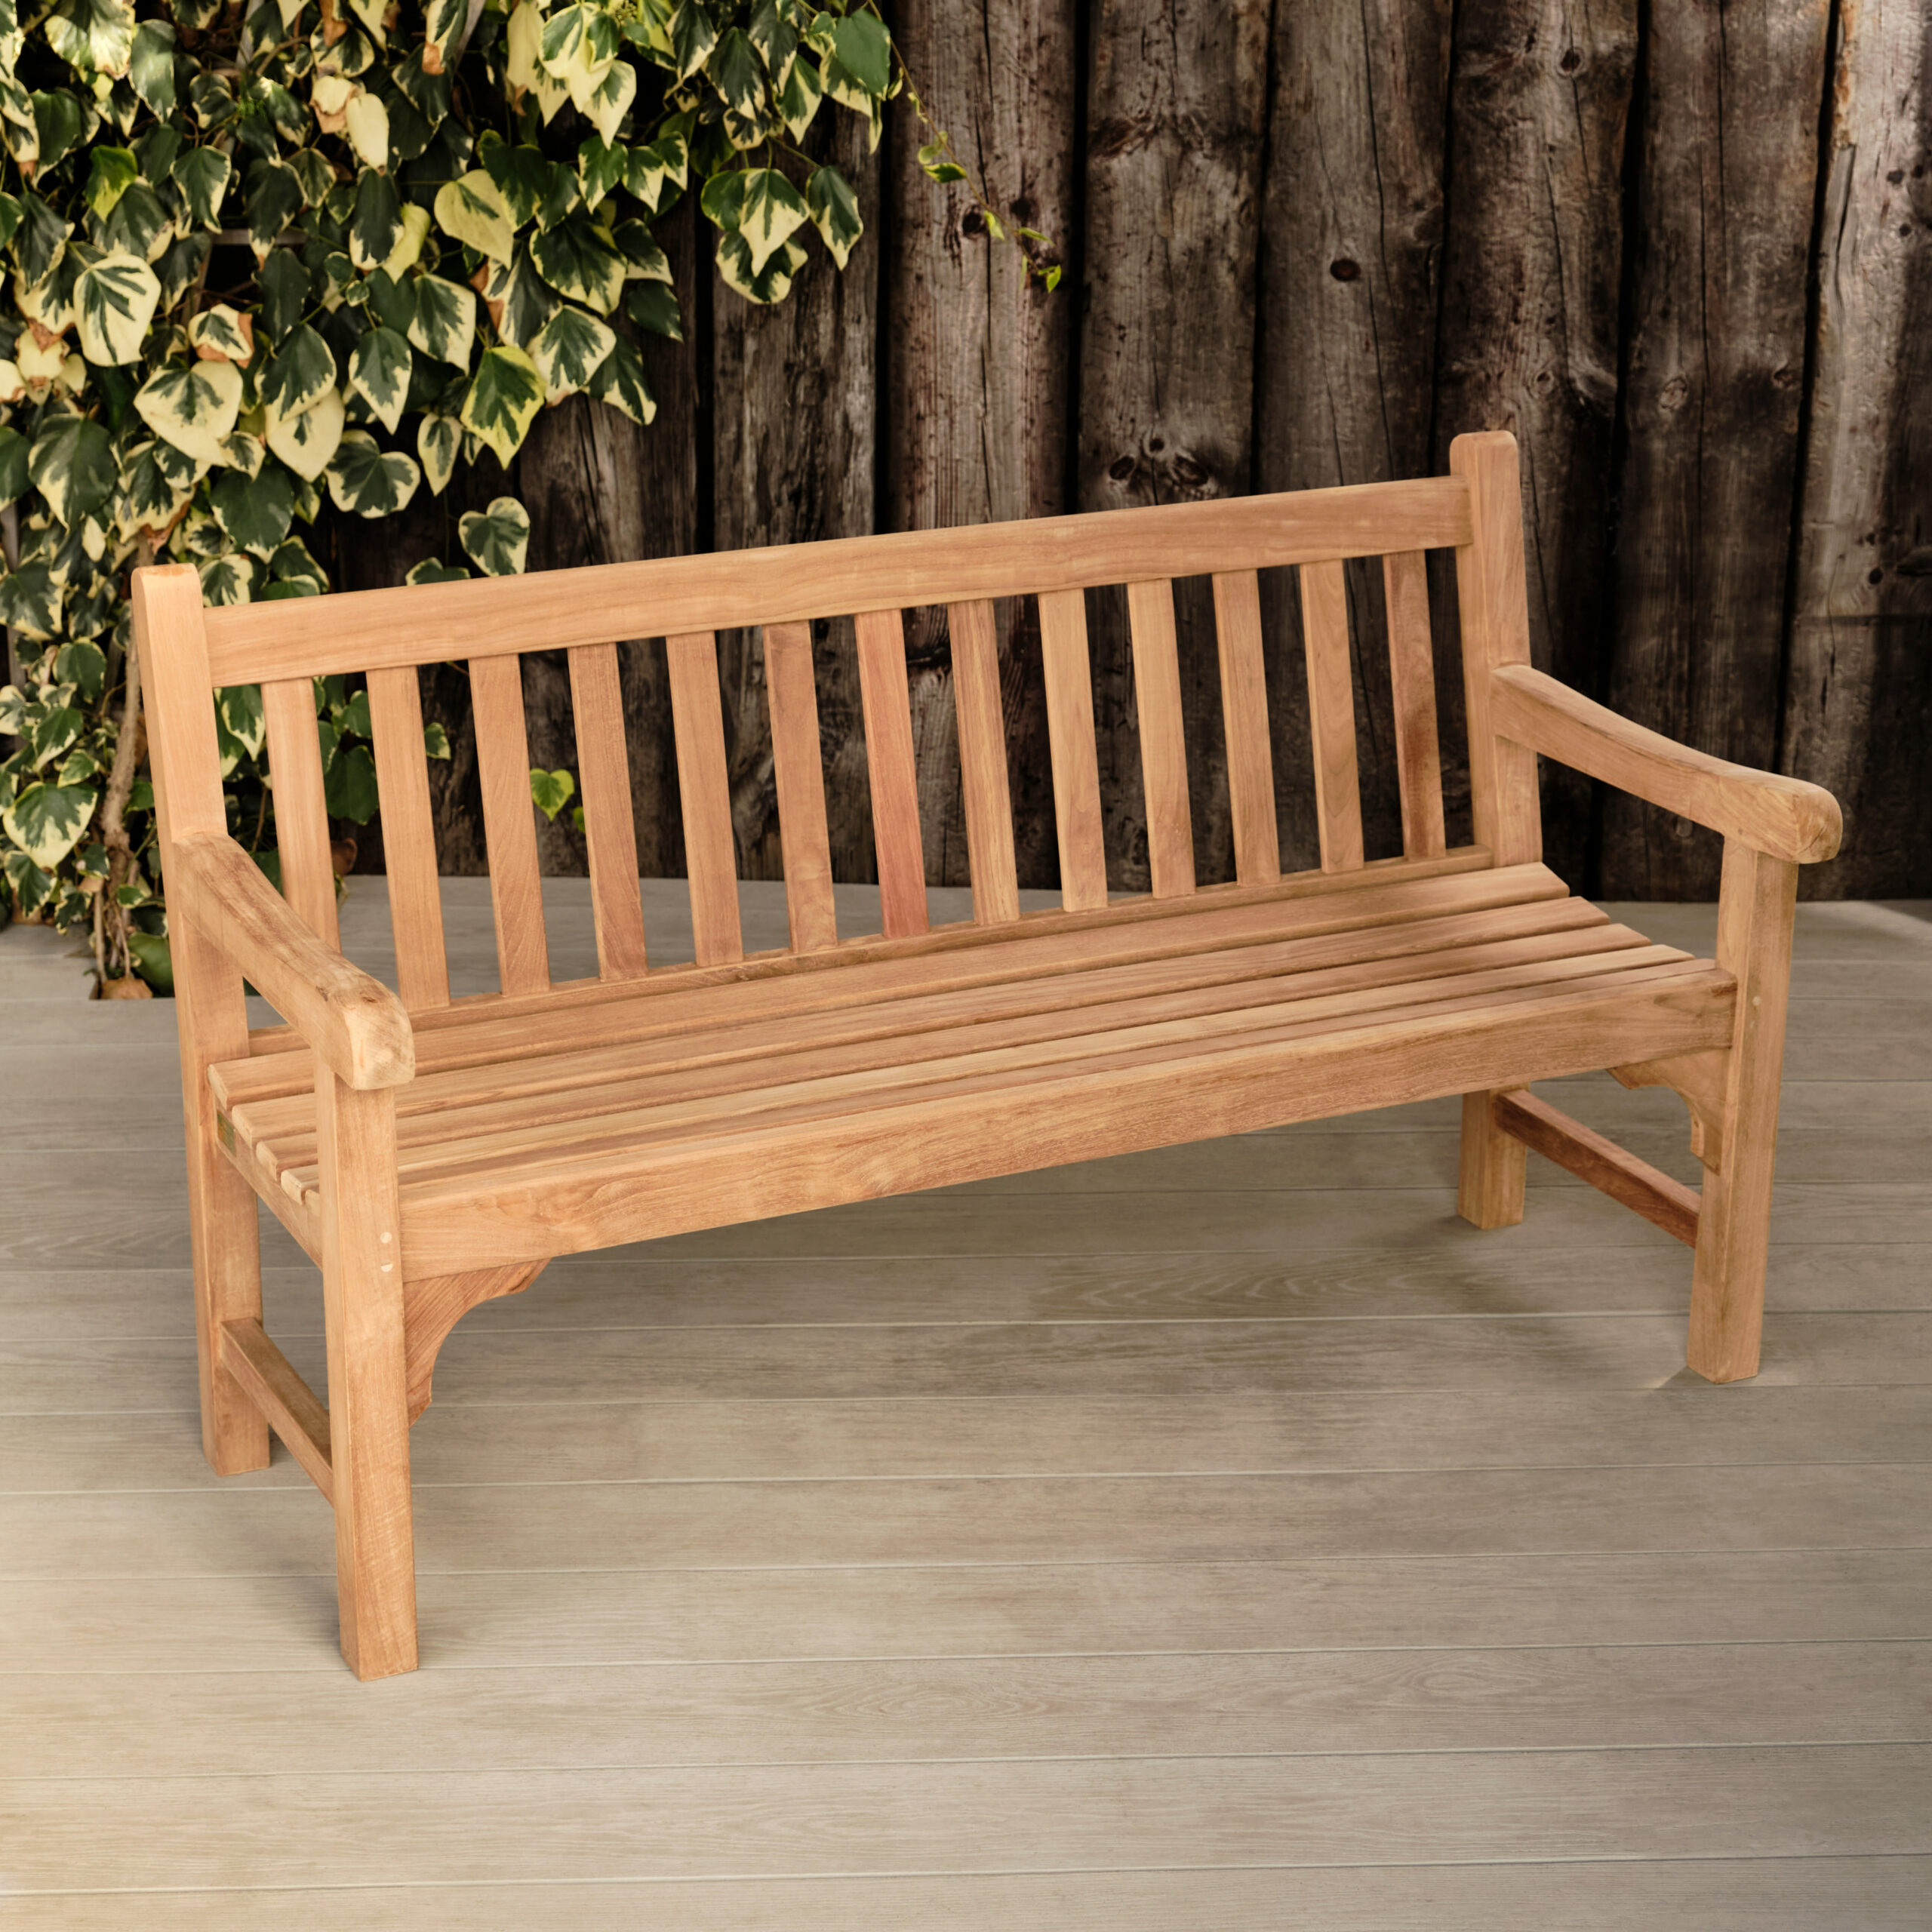 1.5m Teak Wooden Bench Commercial Outdoor Furniture 3 Scaled 